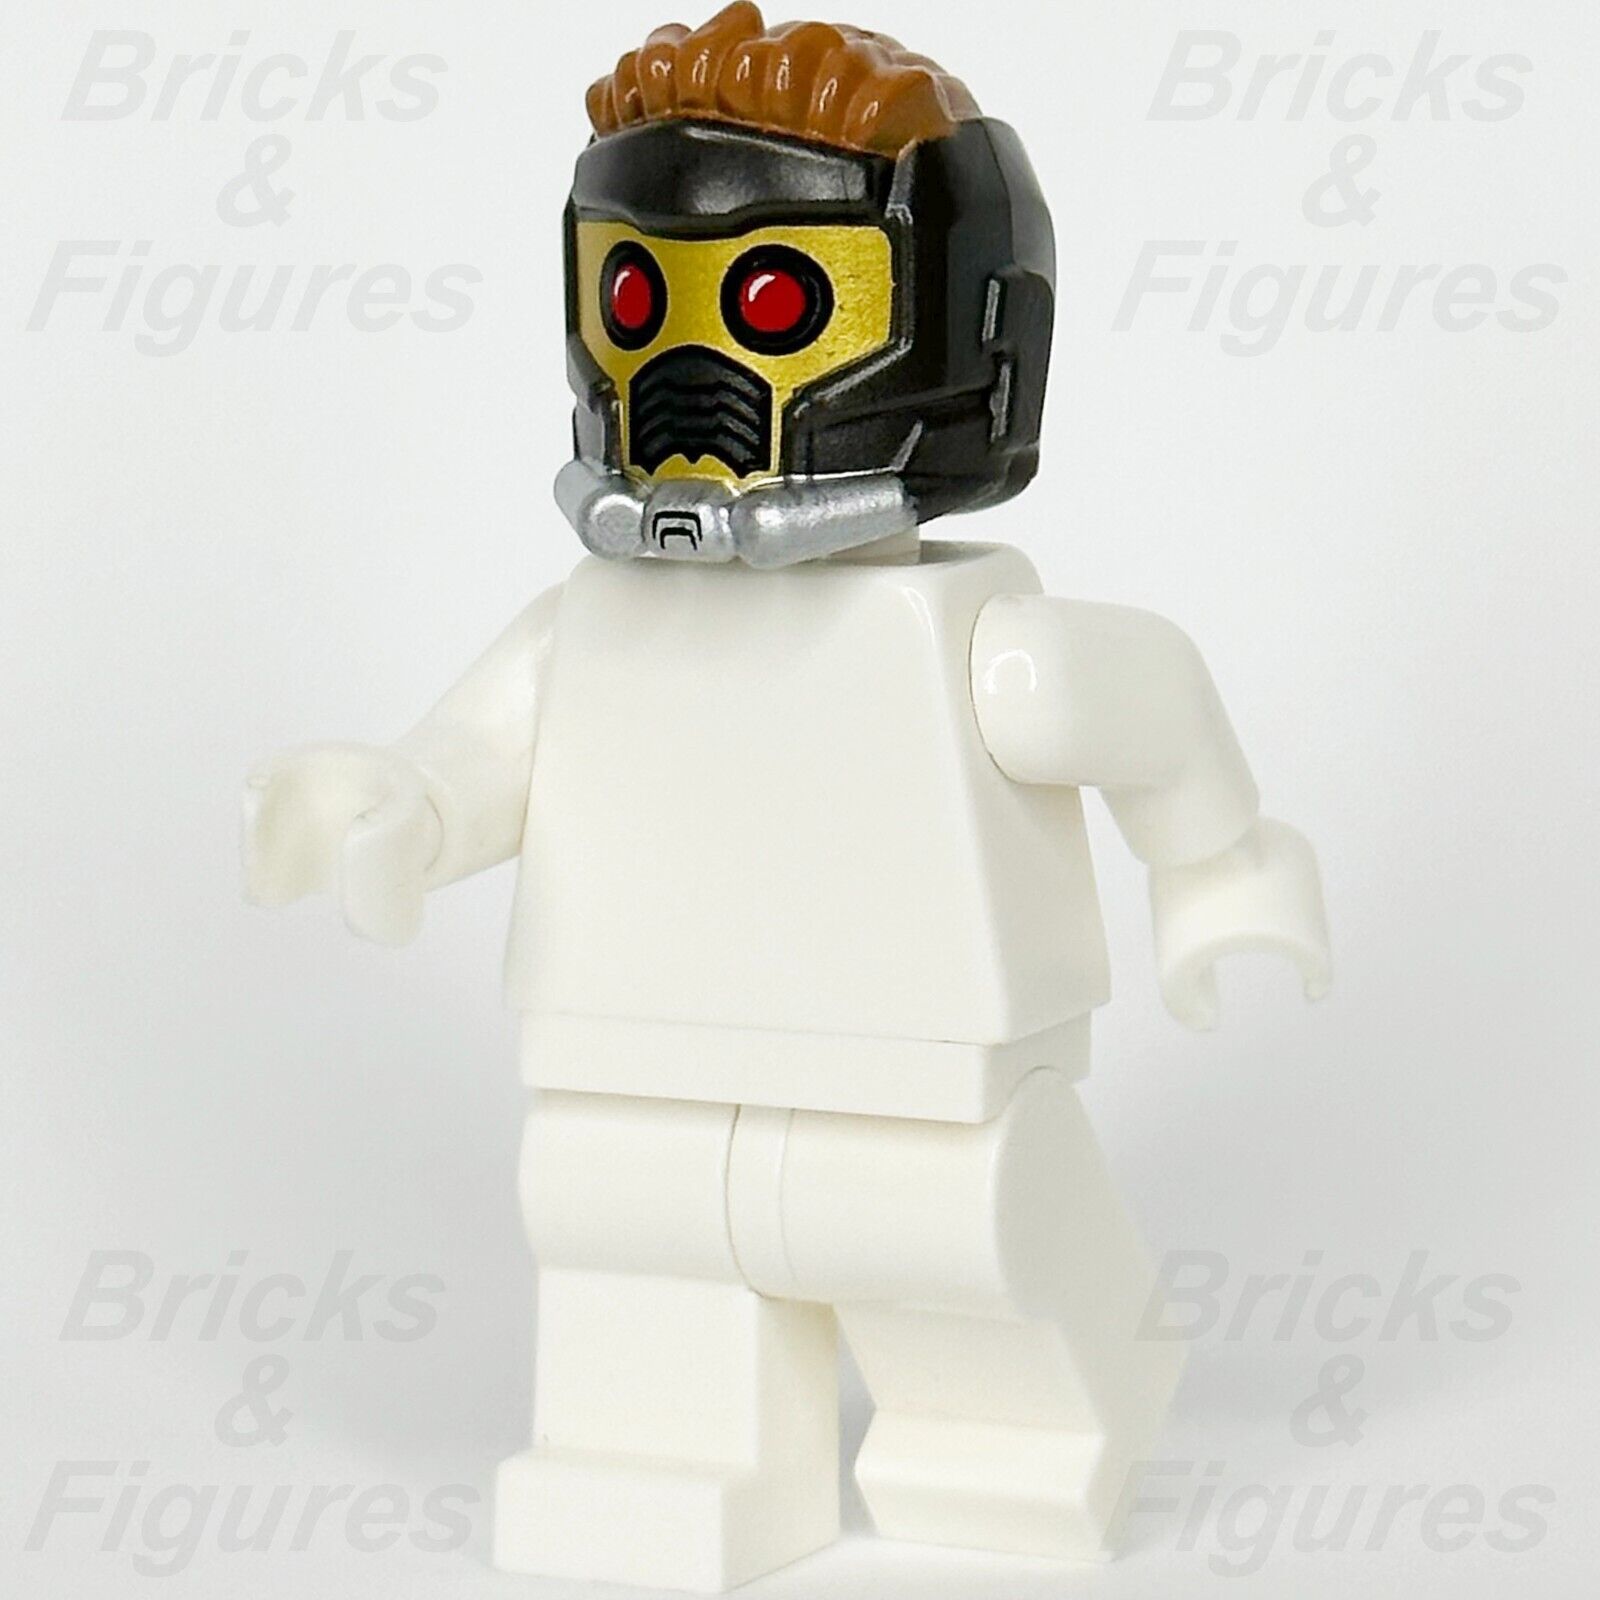 LEGO Super Heroes Star-Lord's Helmet Minifigure Part Guardians of the Galaxy 3